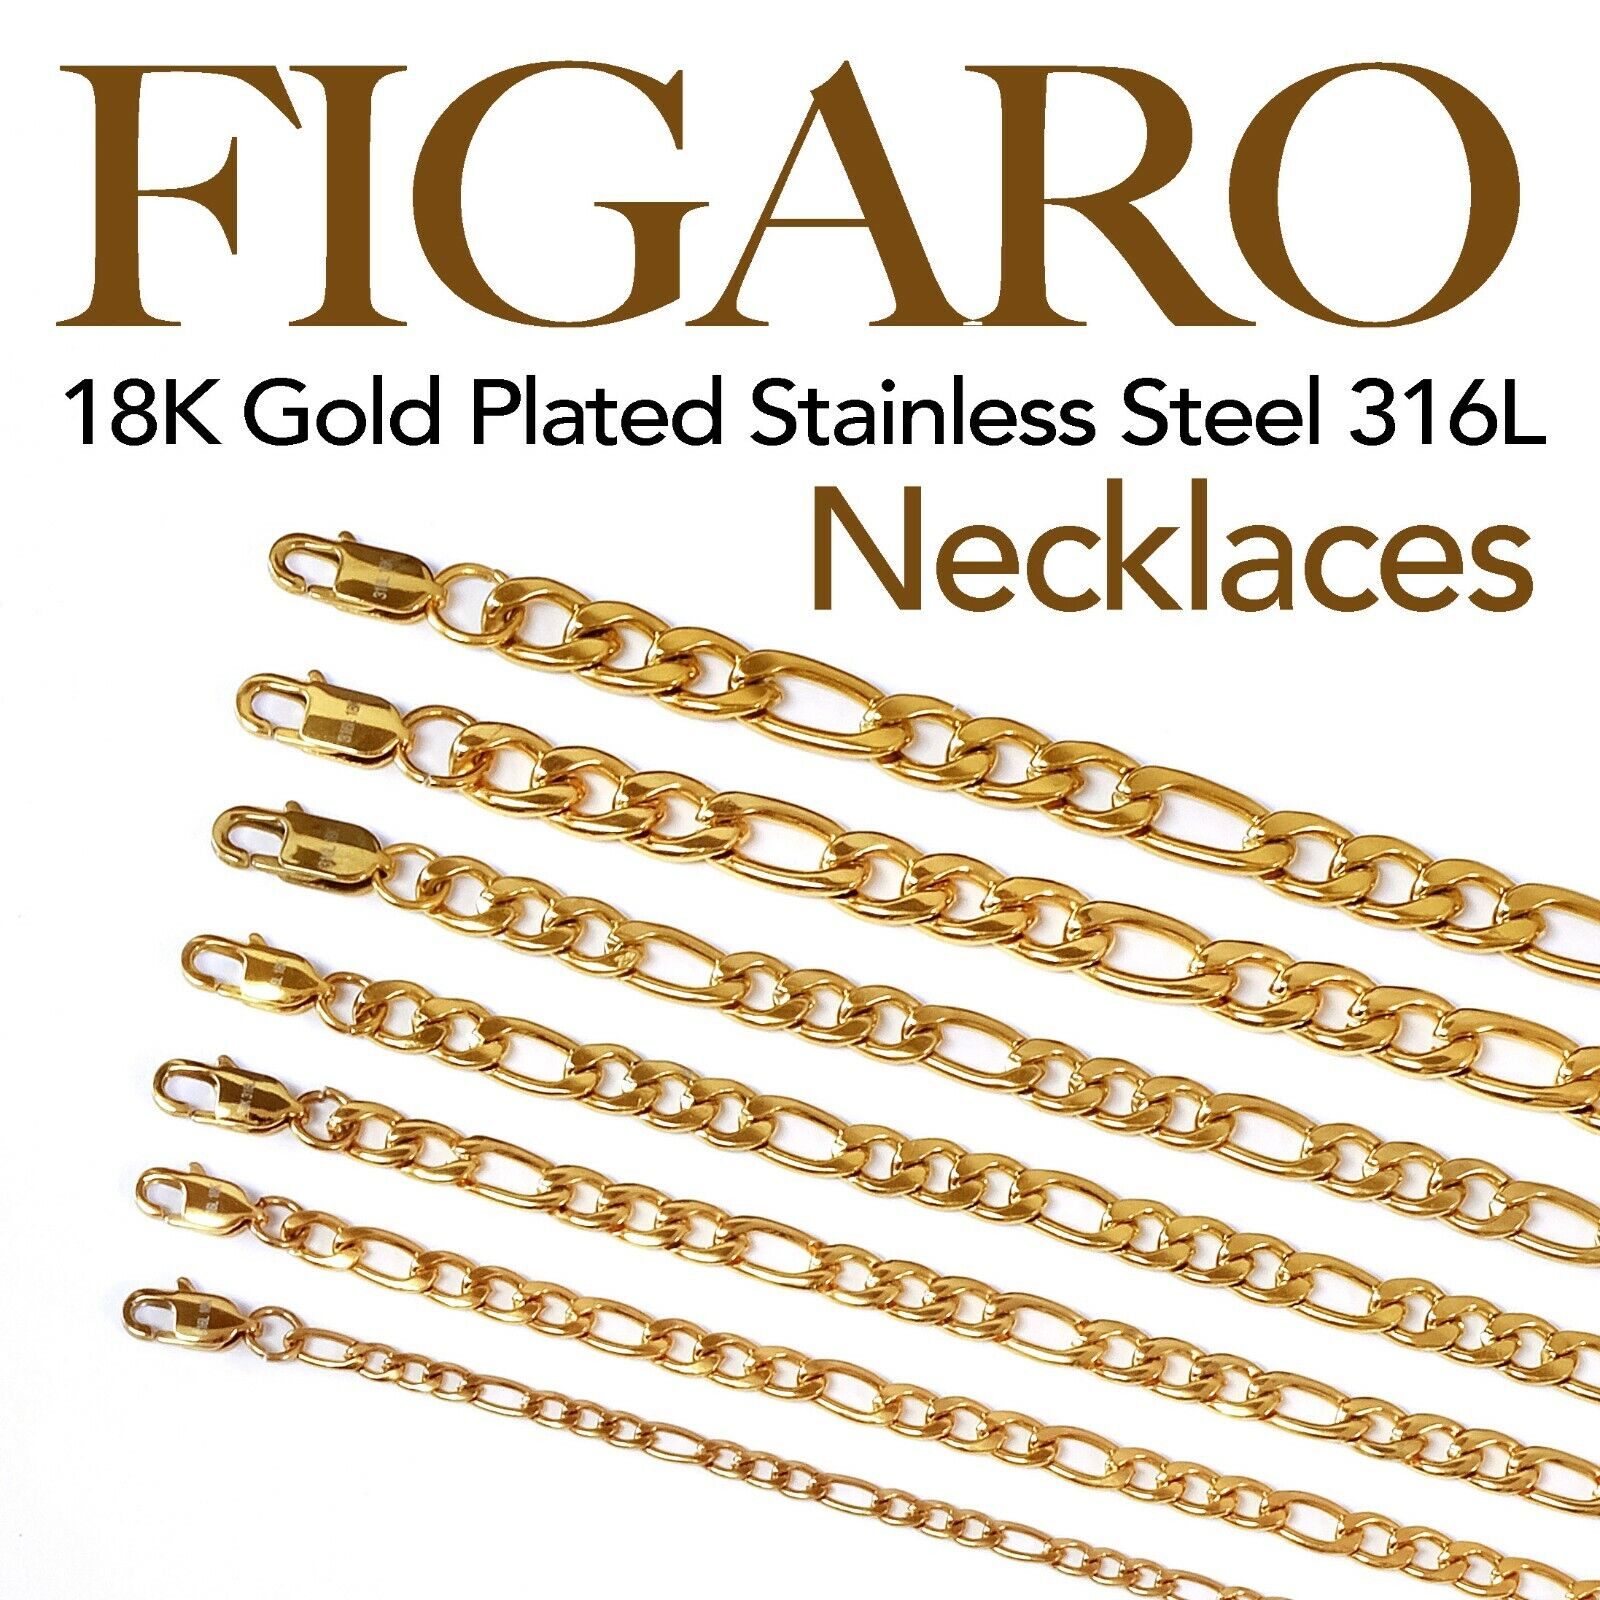 Figaro 18K Gold Plated Stainless Steel Link Chain Necklace Man Woman 14in-48in Unbranded